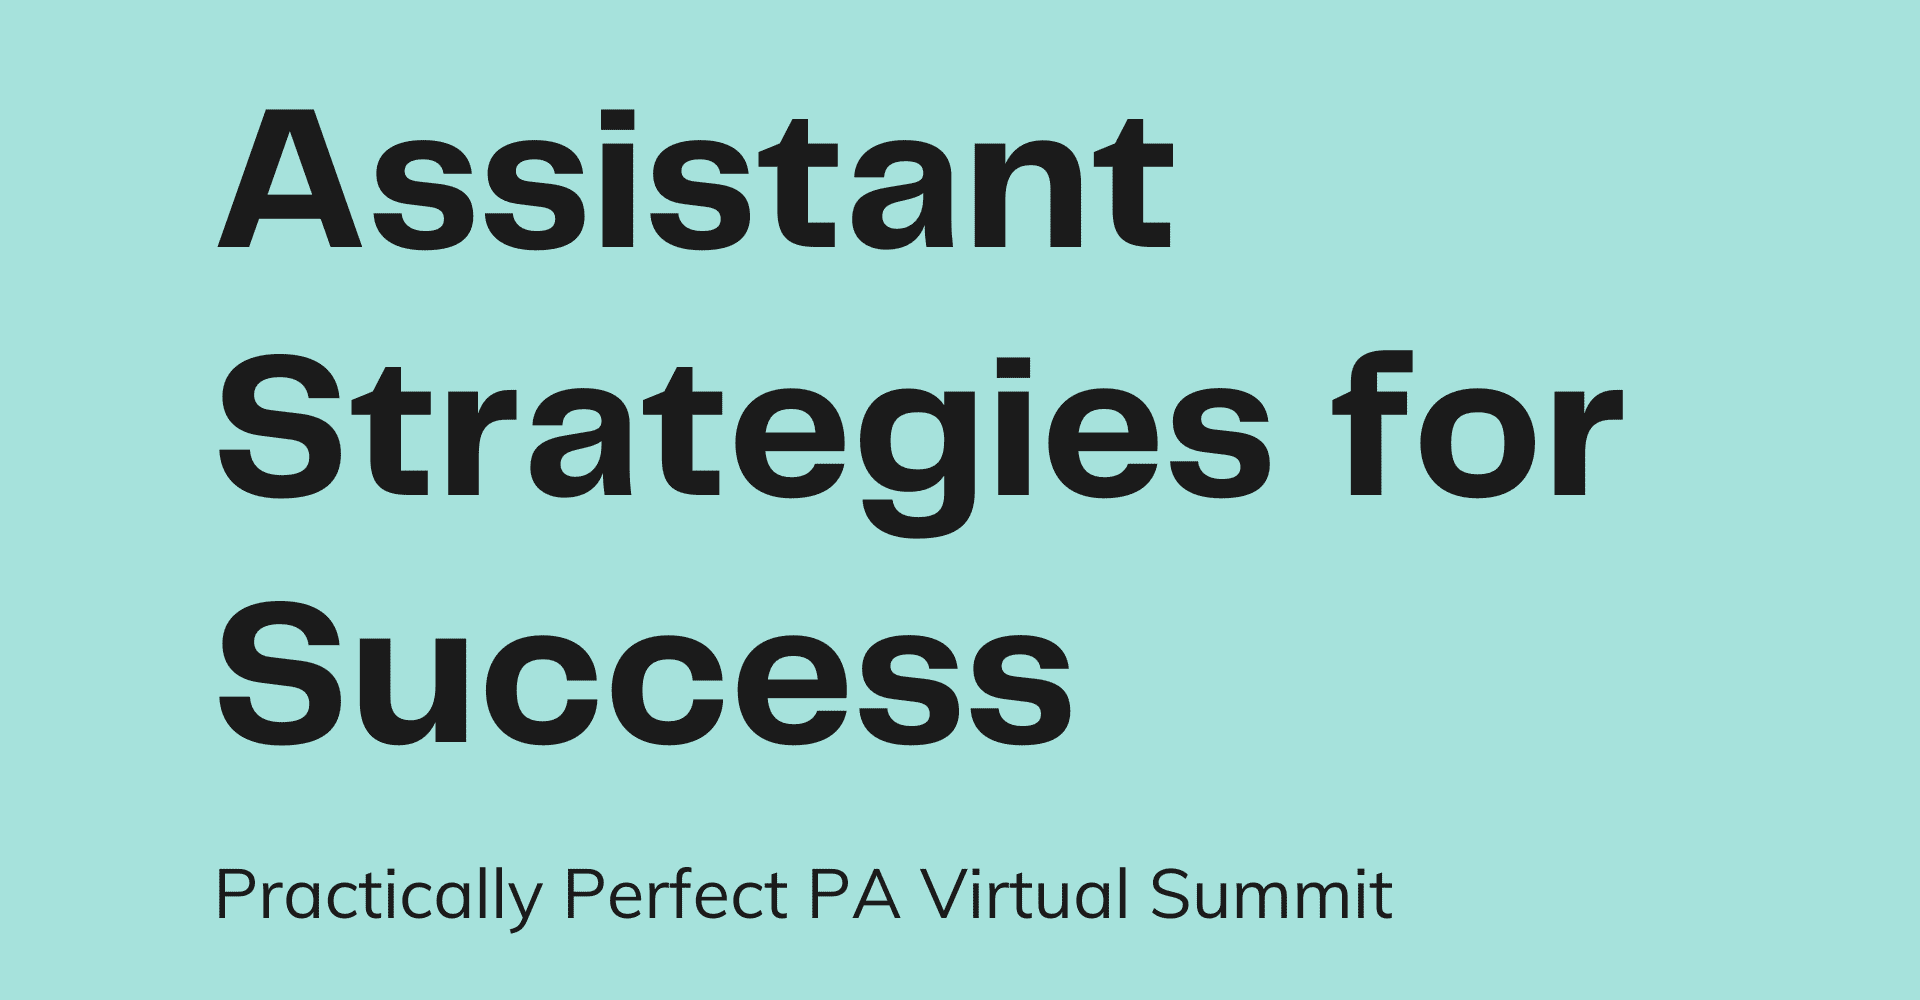 Assistant strategies for success virtual summit logo